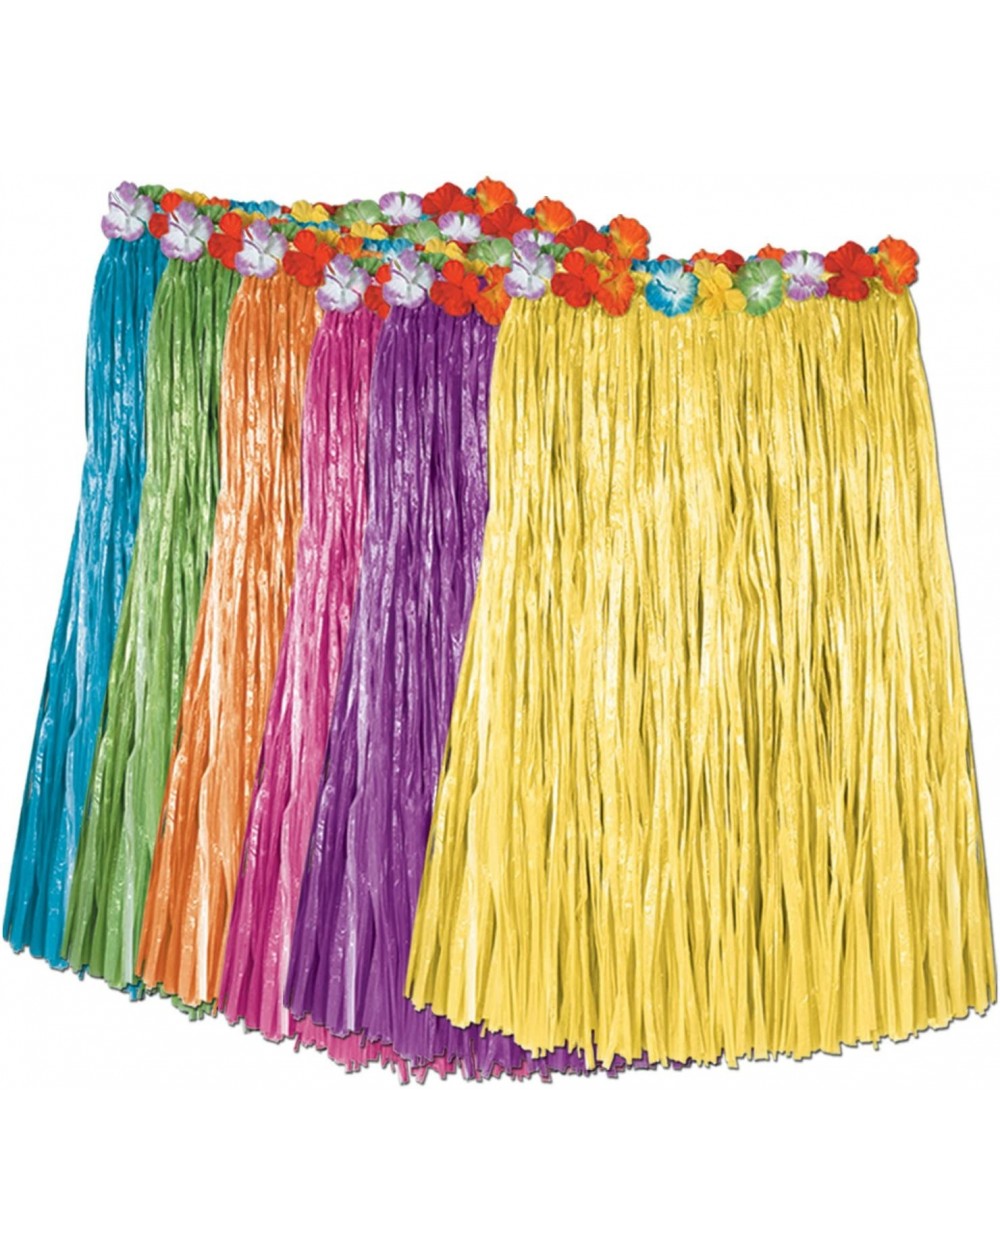 Streamers Adult Artificial Grass Hula Skirts Party Supplies- Assorted - Assorted - CE1172XJ5PB $10.63